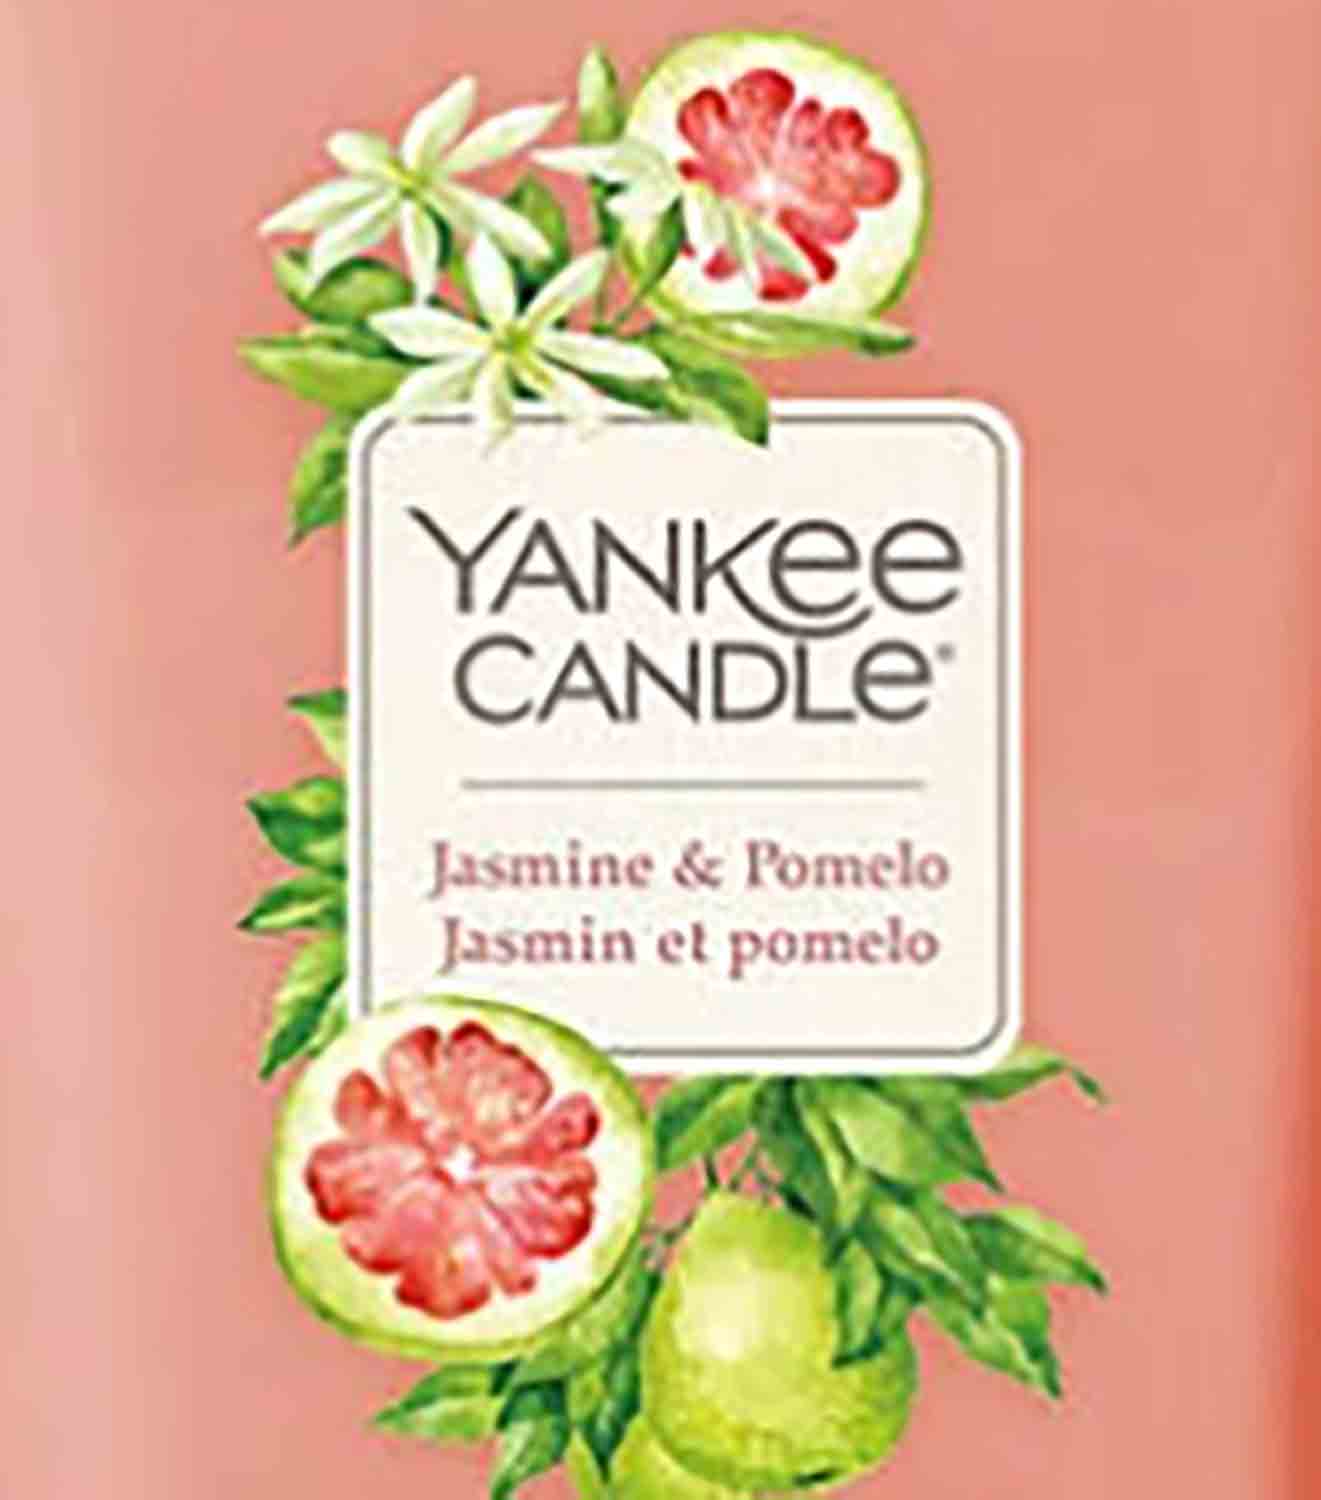 Yankee Candle Jasmine and Pomelo Elevation 22g - Crumble vosk